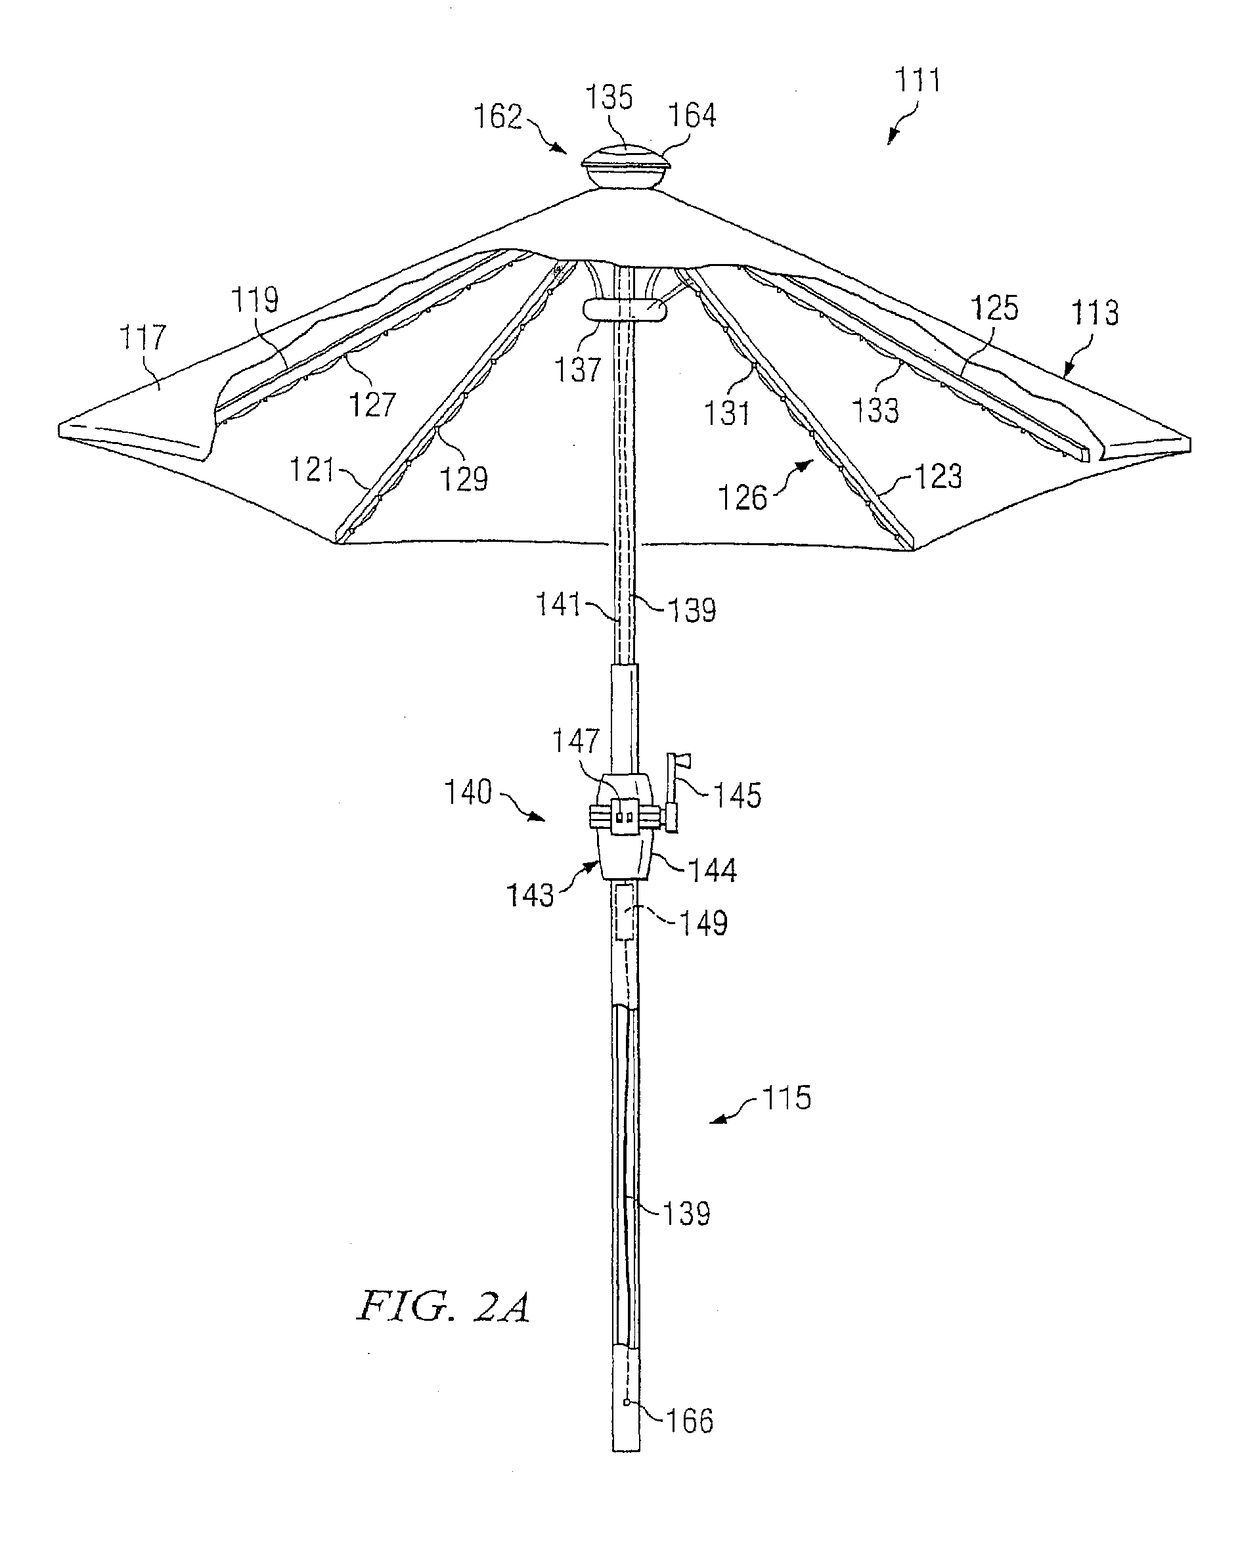 Umbrella opening and closing system